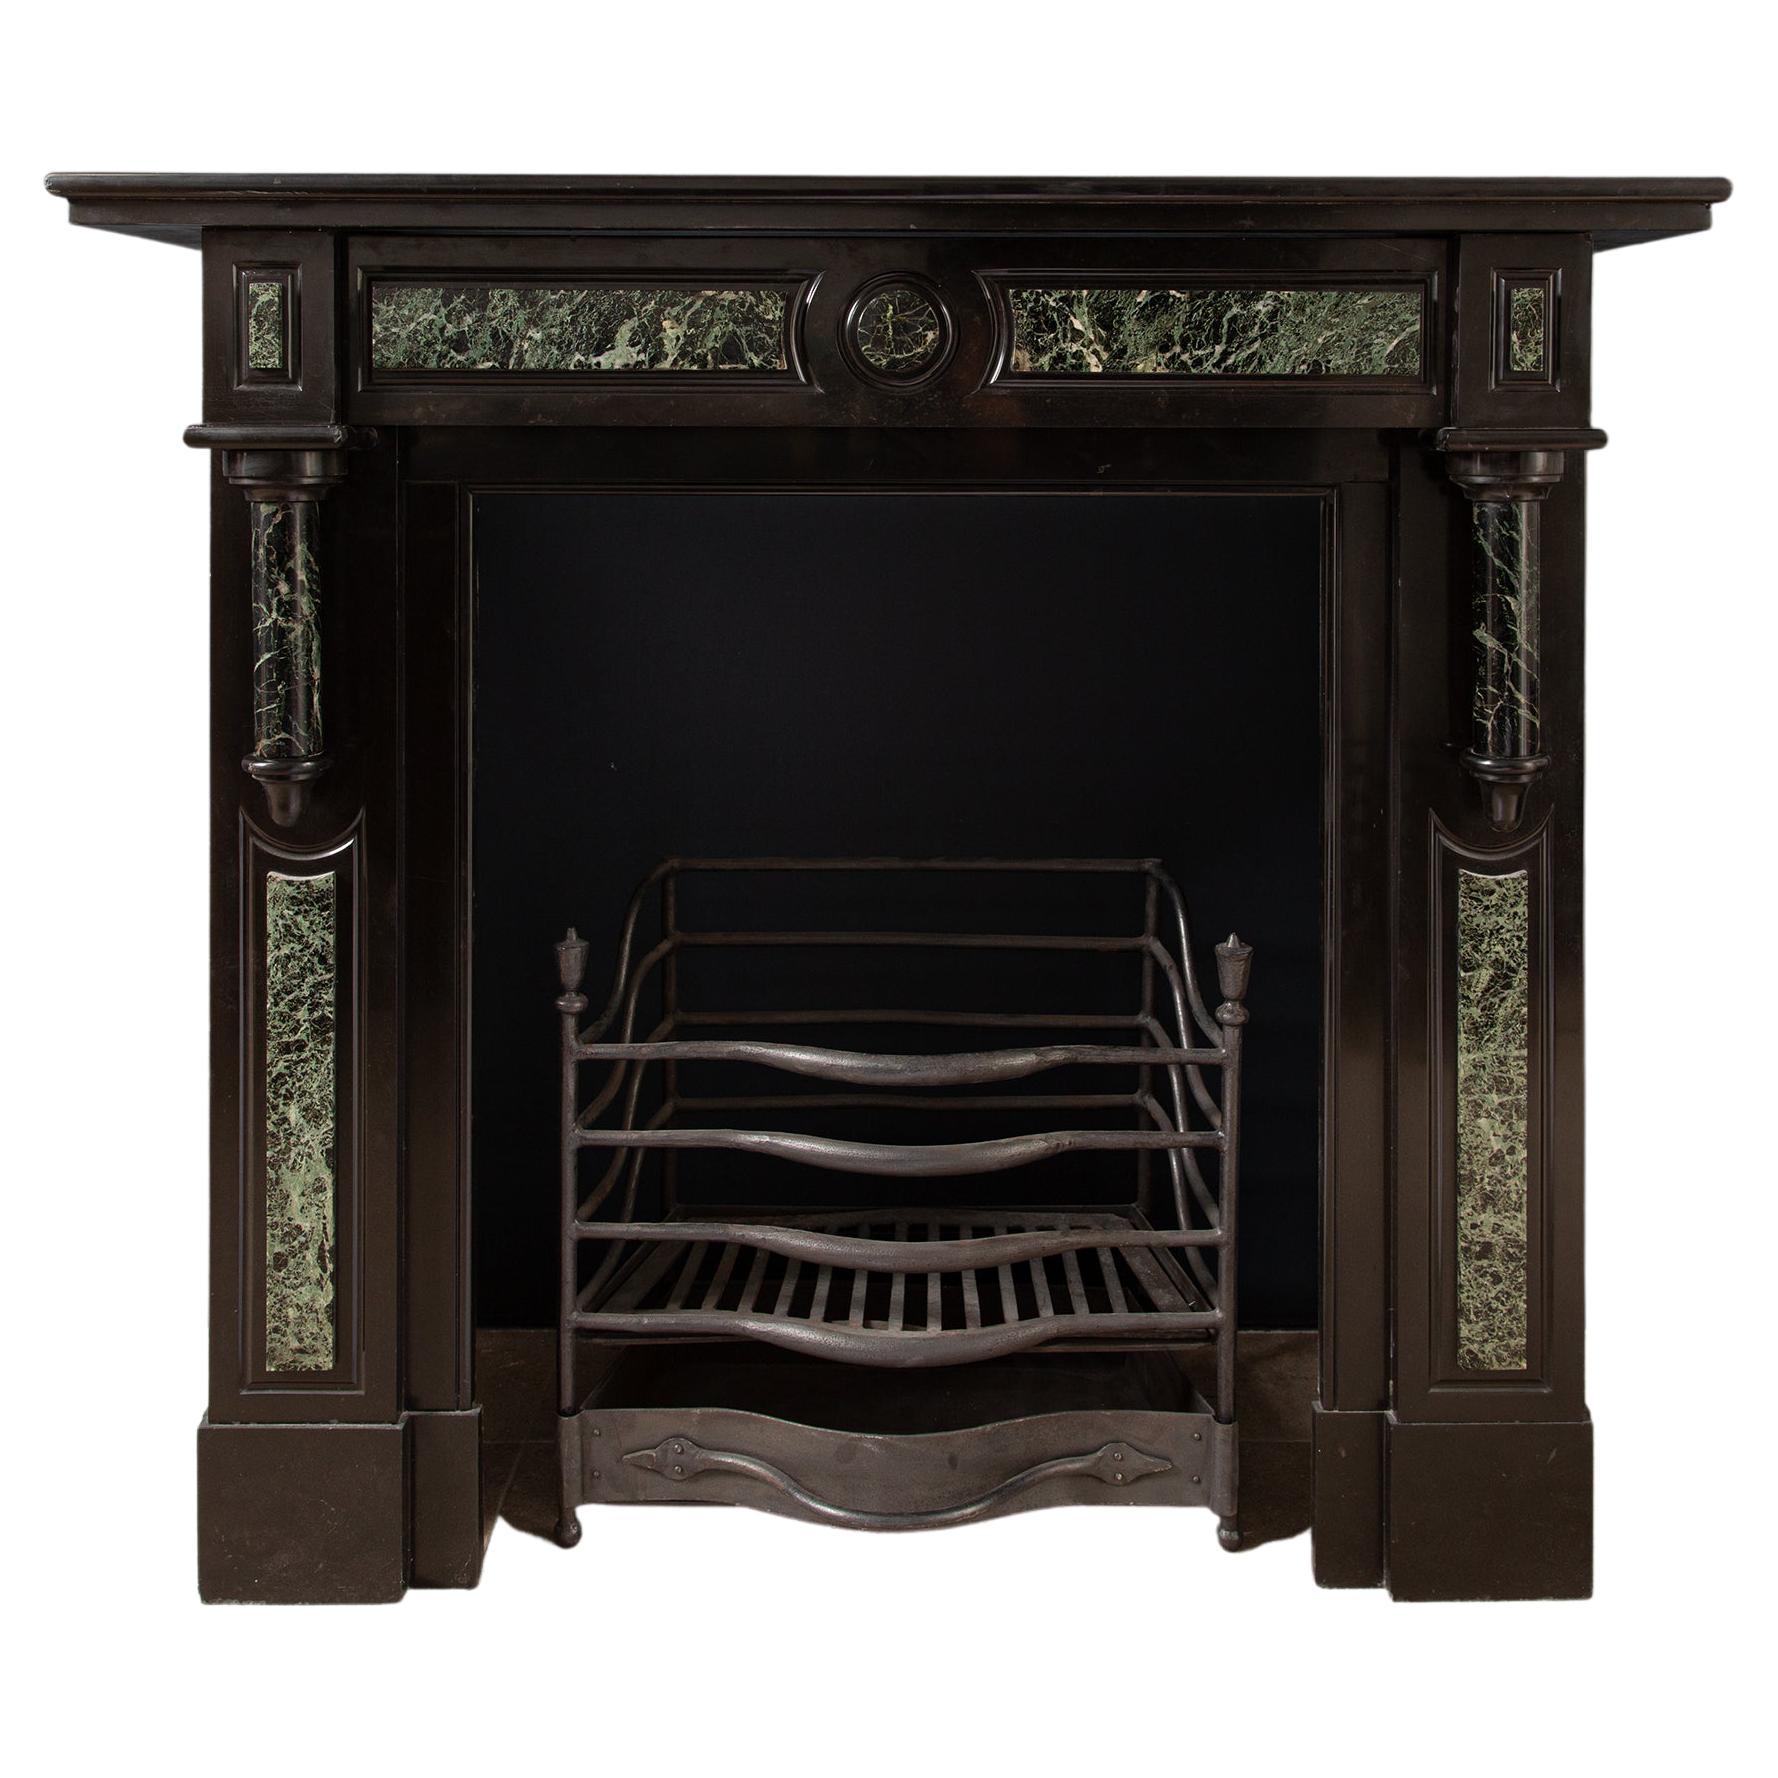 Antique Green and Black Marble Circulation Fireplace For Sale